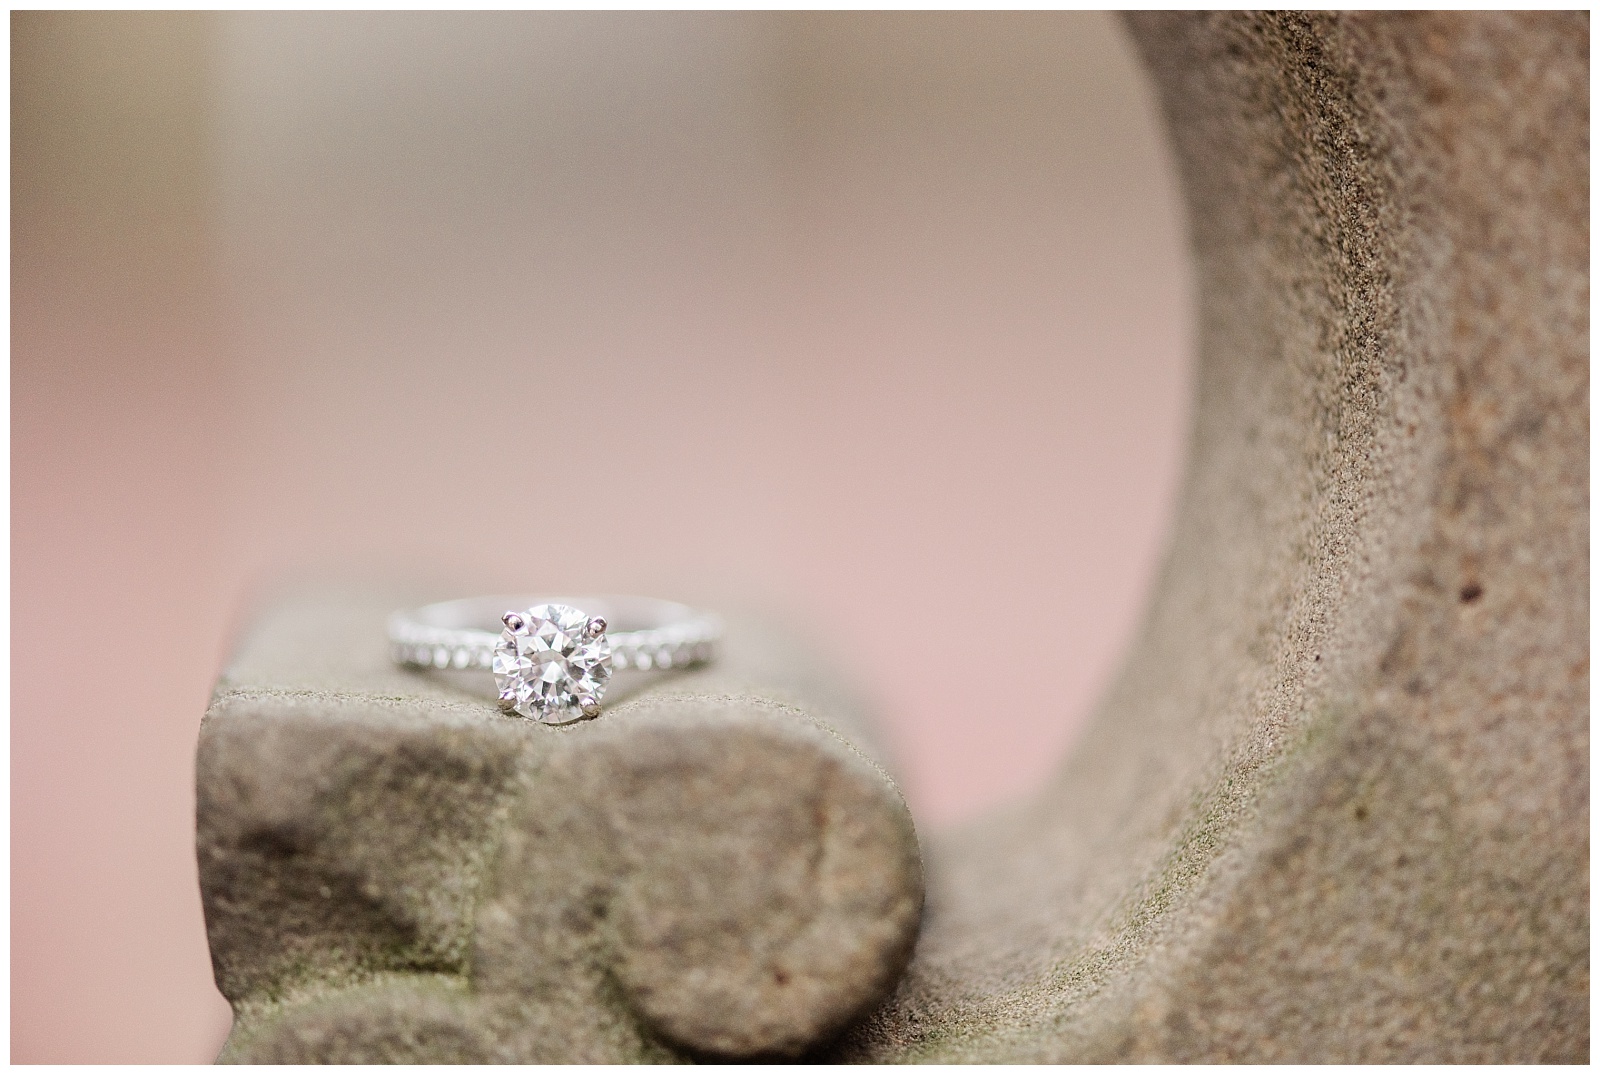 A diamond engagement ring sits on a concrete piece of architecture.